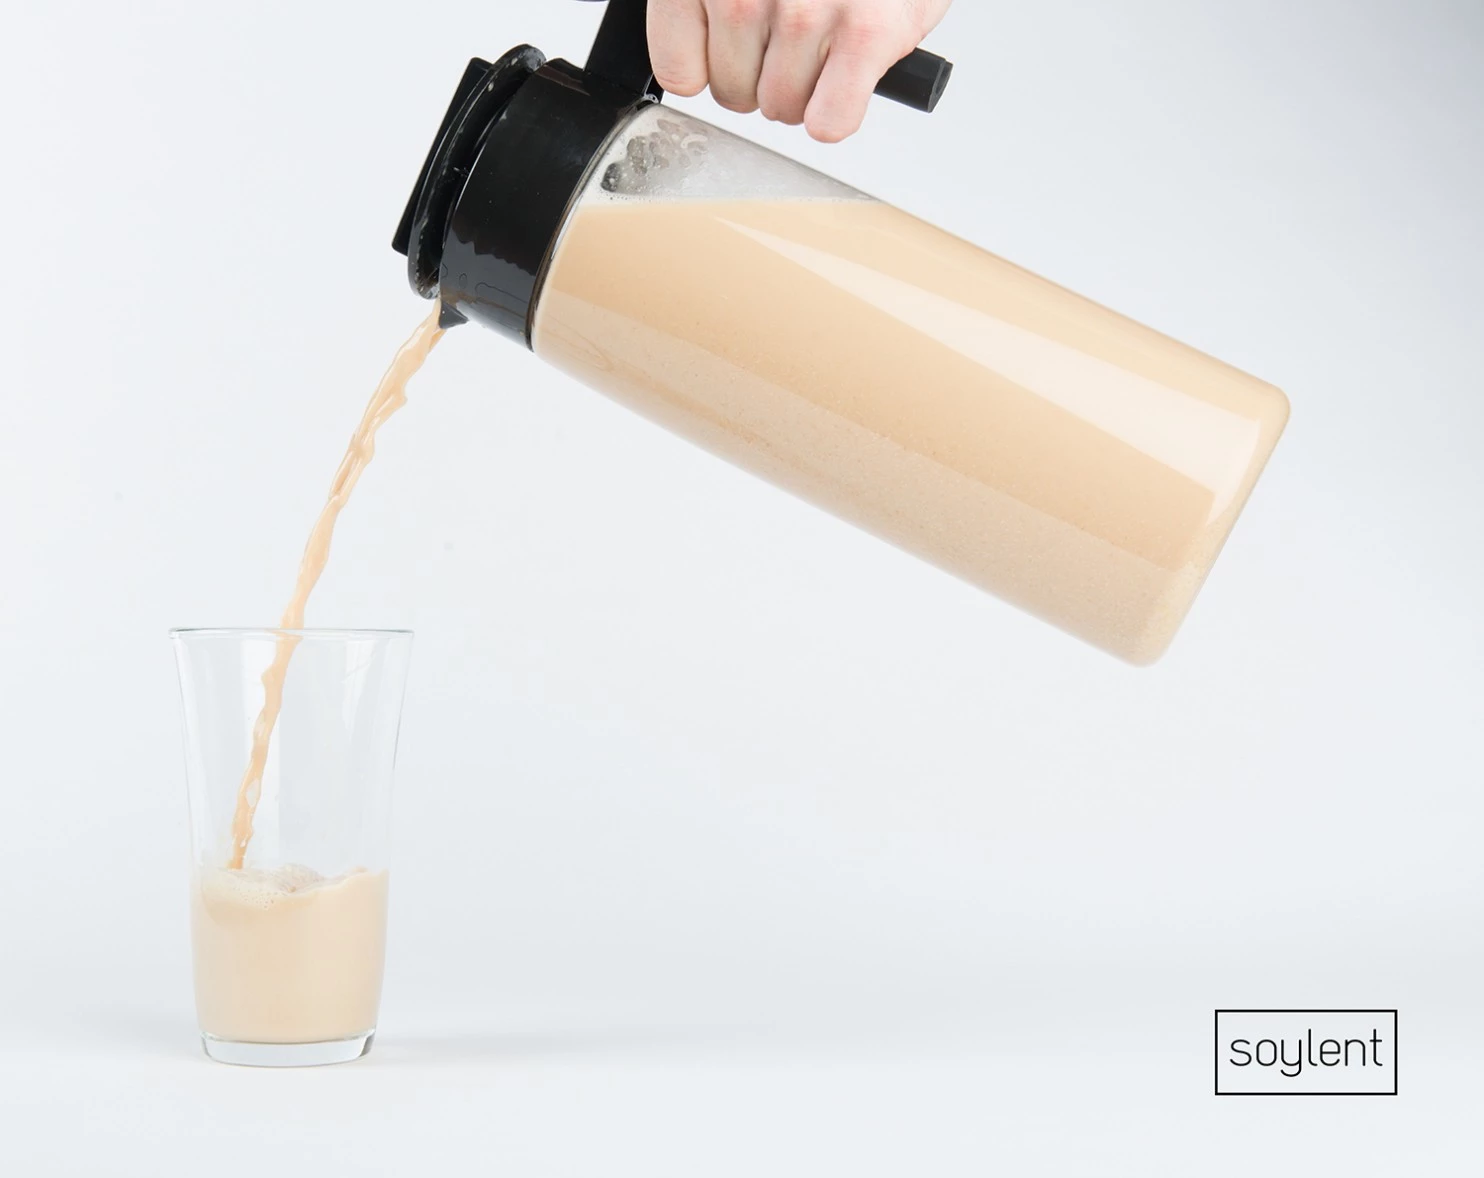 Soylent is marketed as a meal replacement that contains all the essential vitamins, minerals and proteins one needs